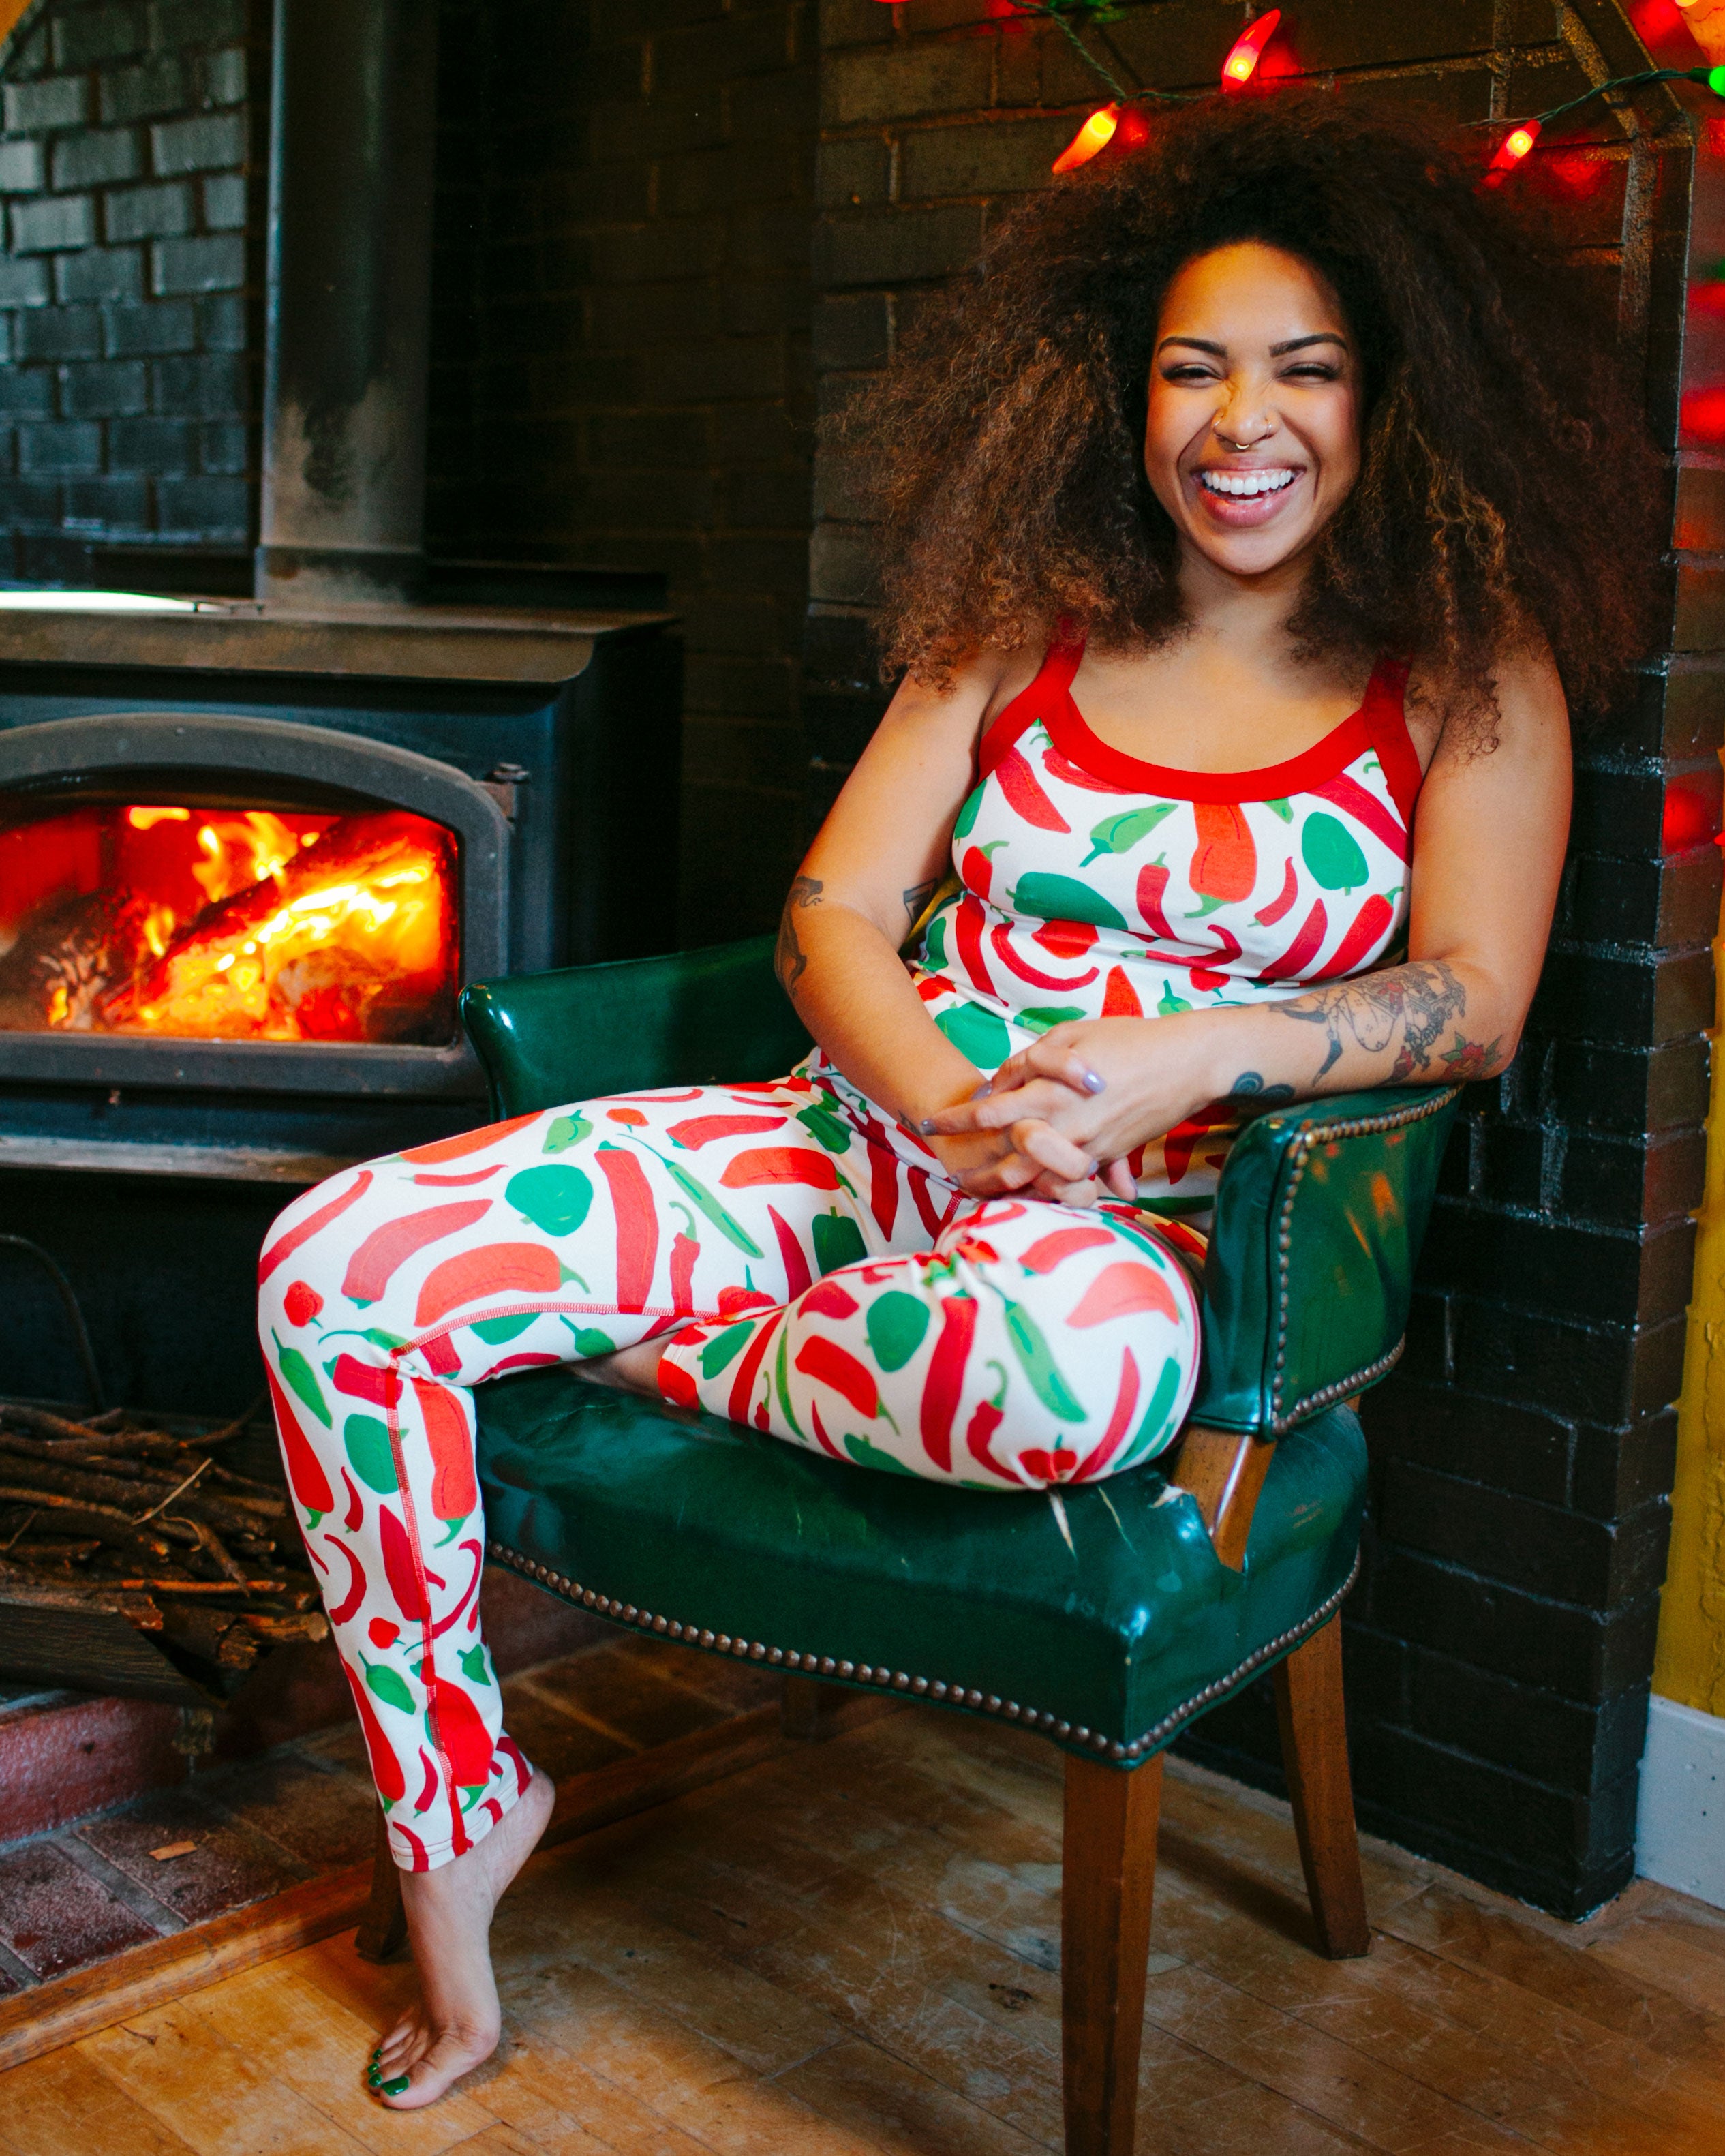 Model sitting by the fire and smiling into the camera wearing Thunderpants organic cotton Leggings and Camisole in our Hot Pants print: various green, orange, and red peppers printed on Vanilla with red binding.